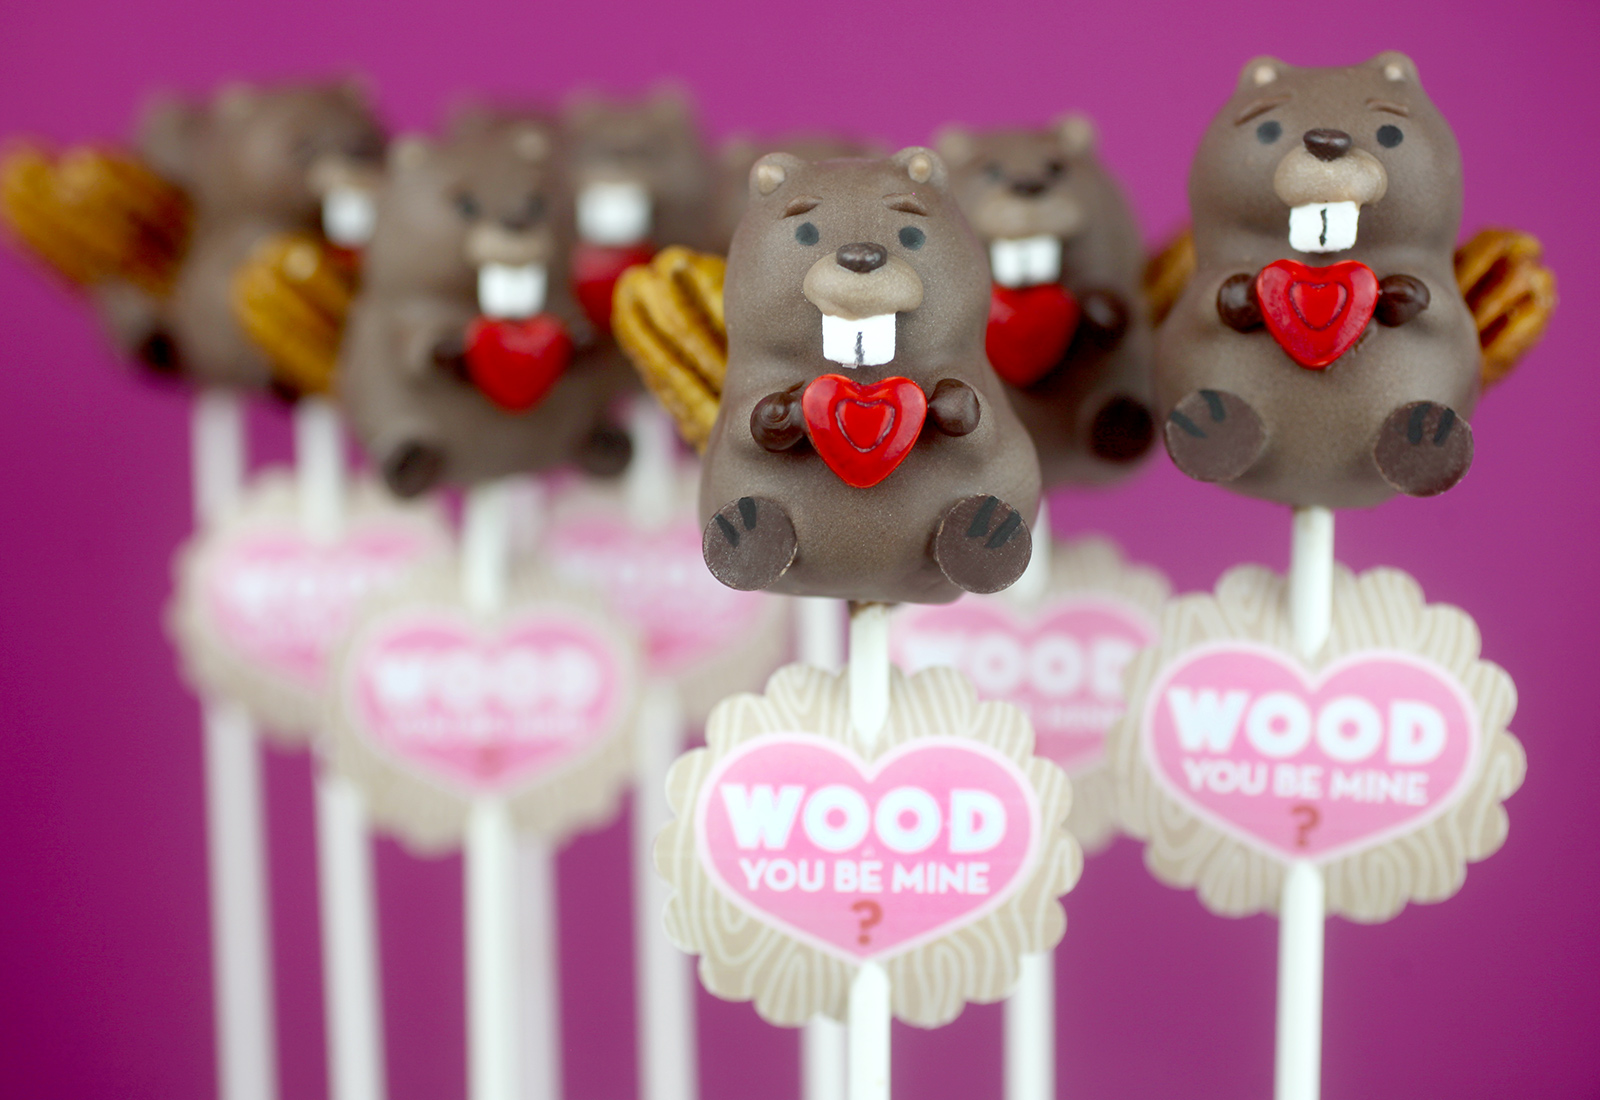 Beaver Cake Pop with Wood you be mine treat tags